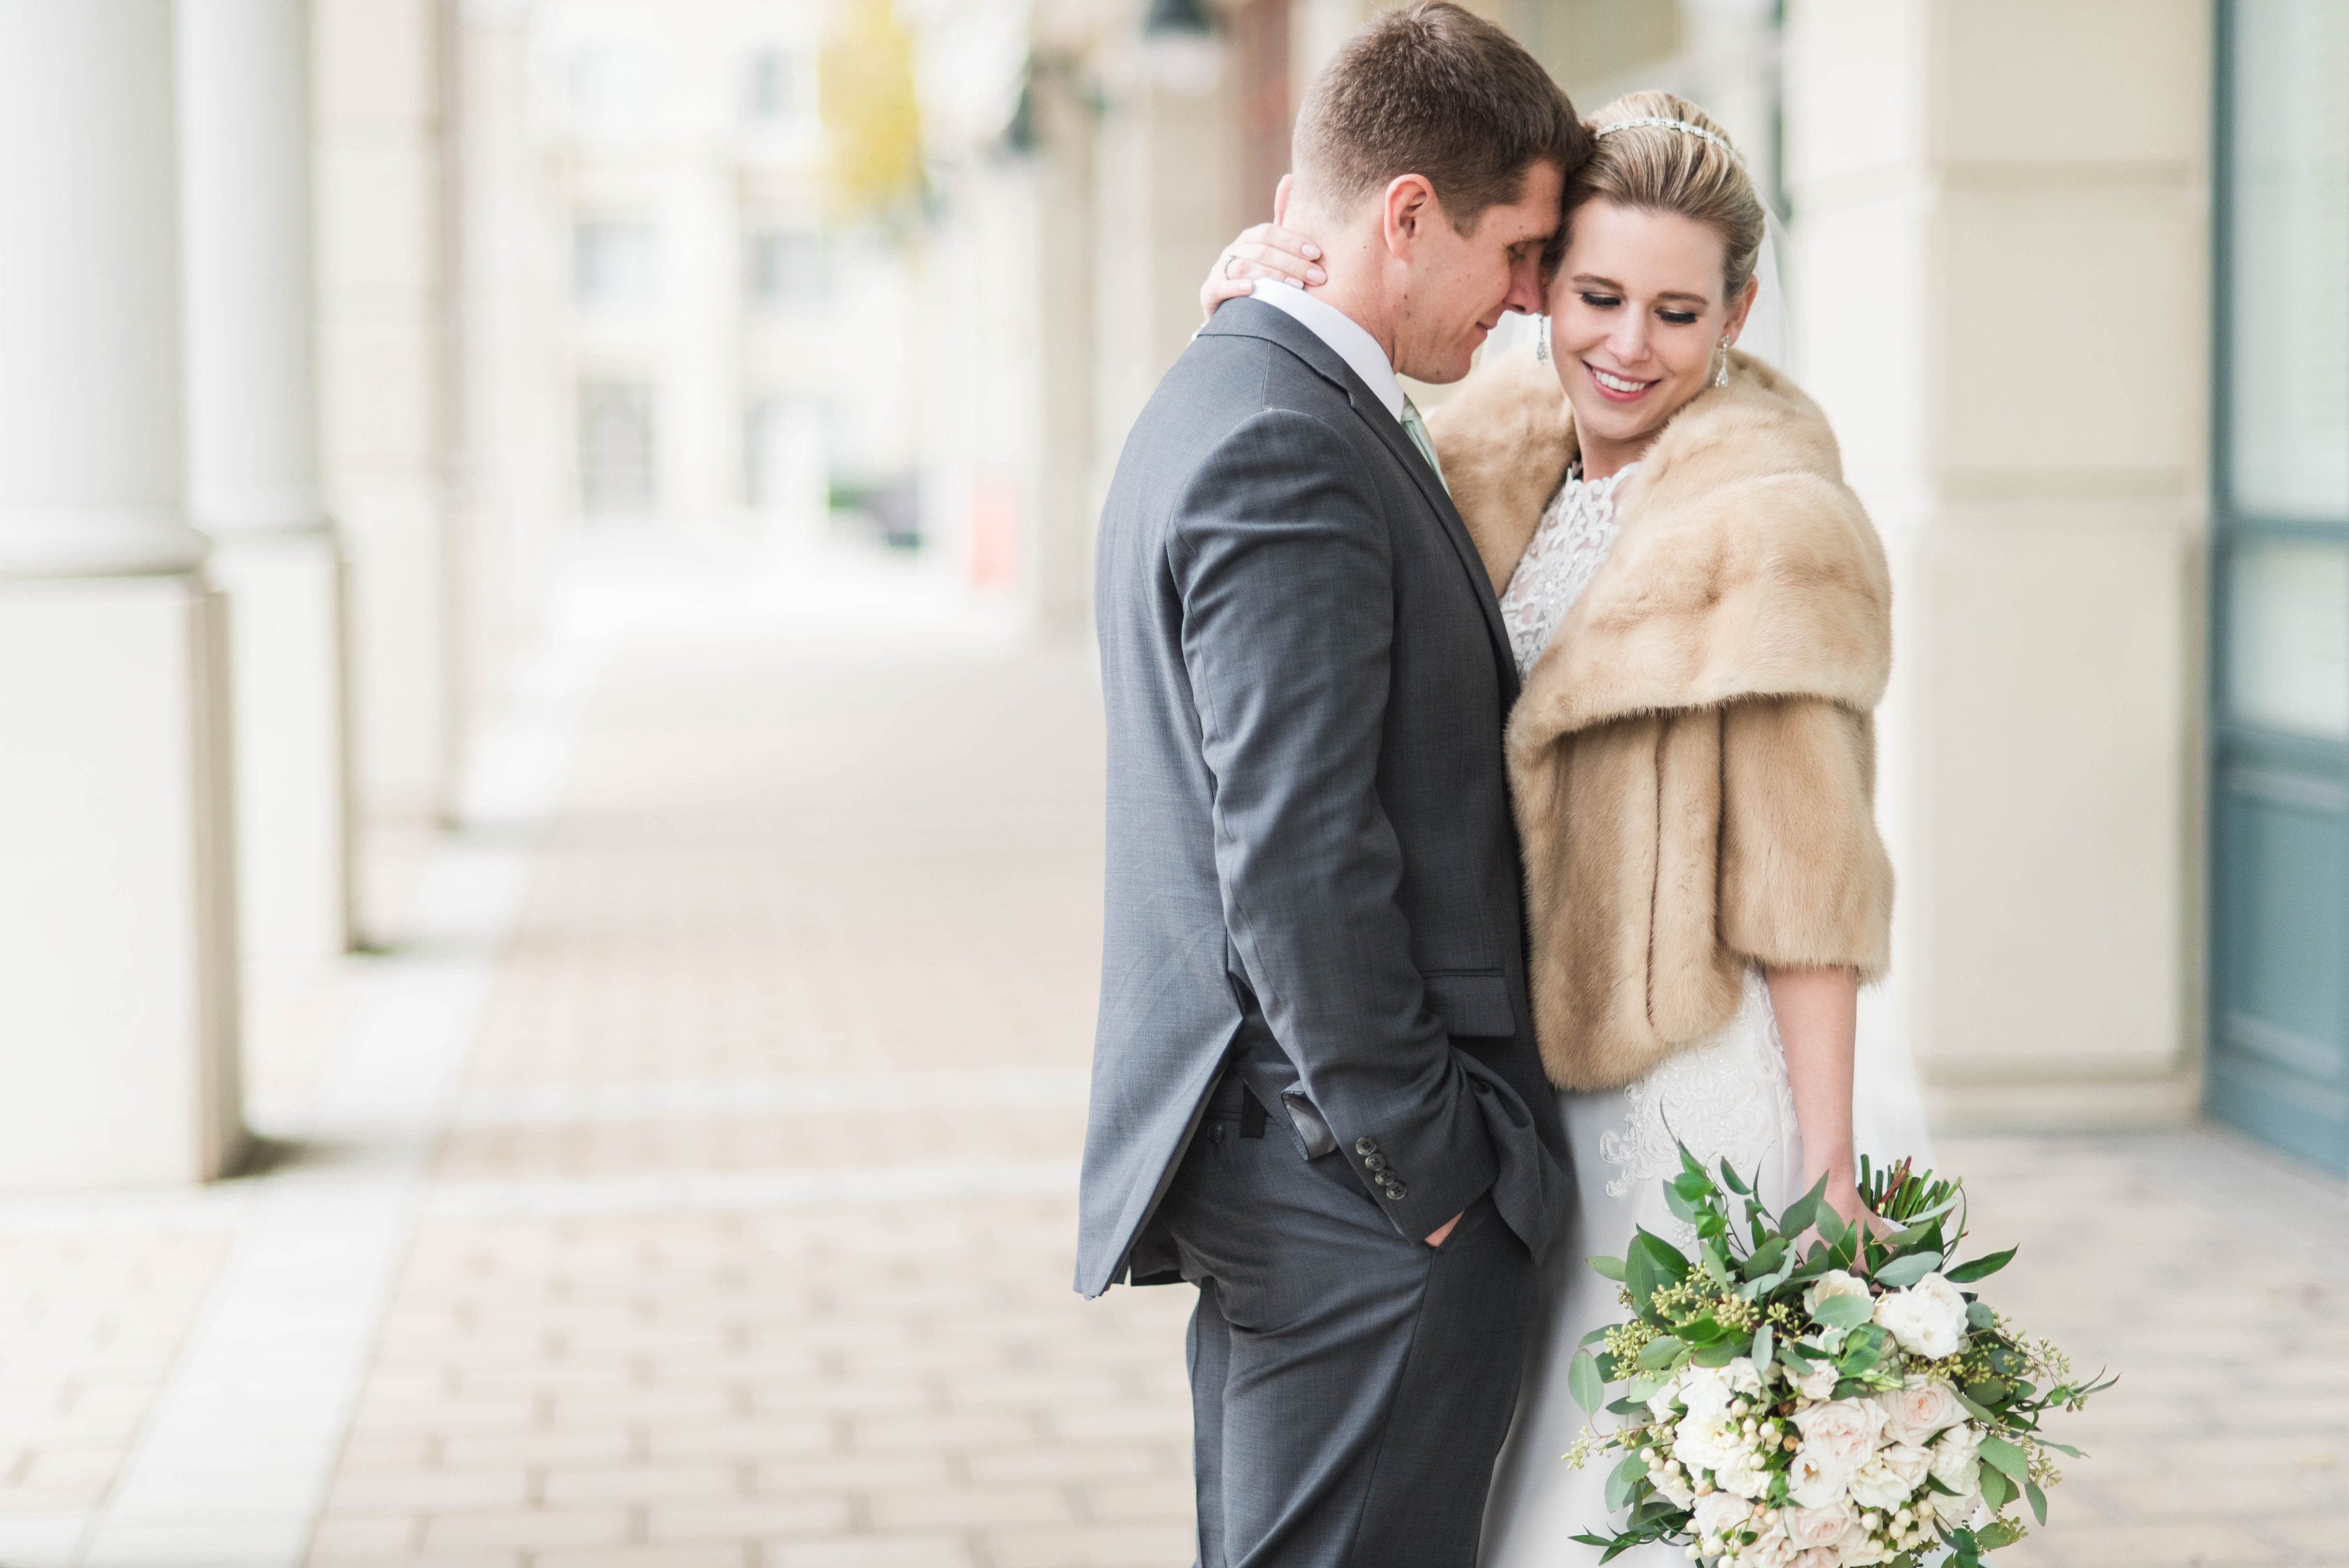 Naval Academy Fall Wedding in Annapolis, MD